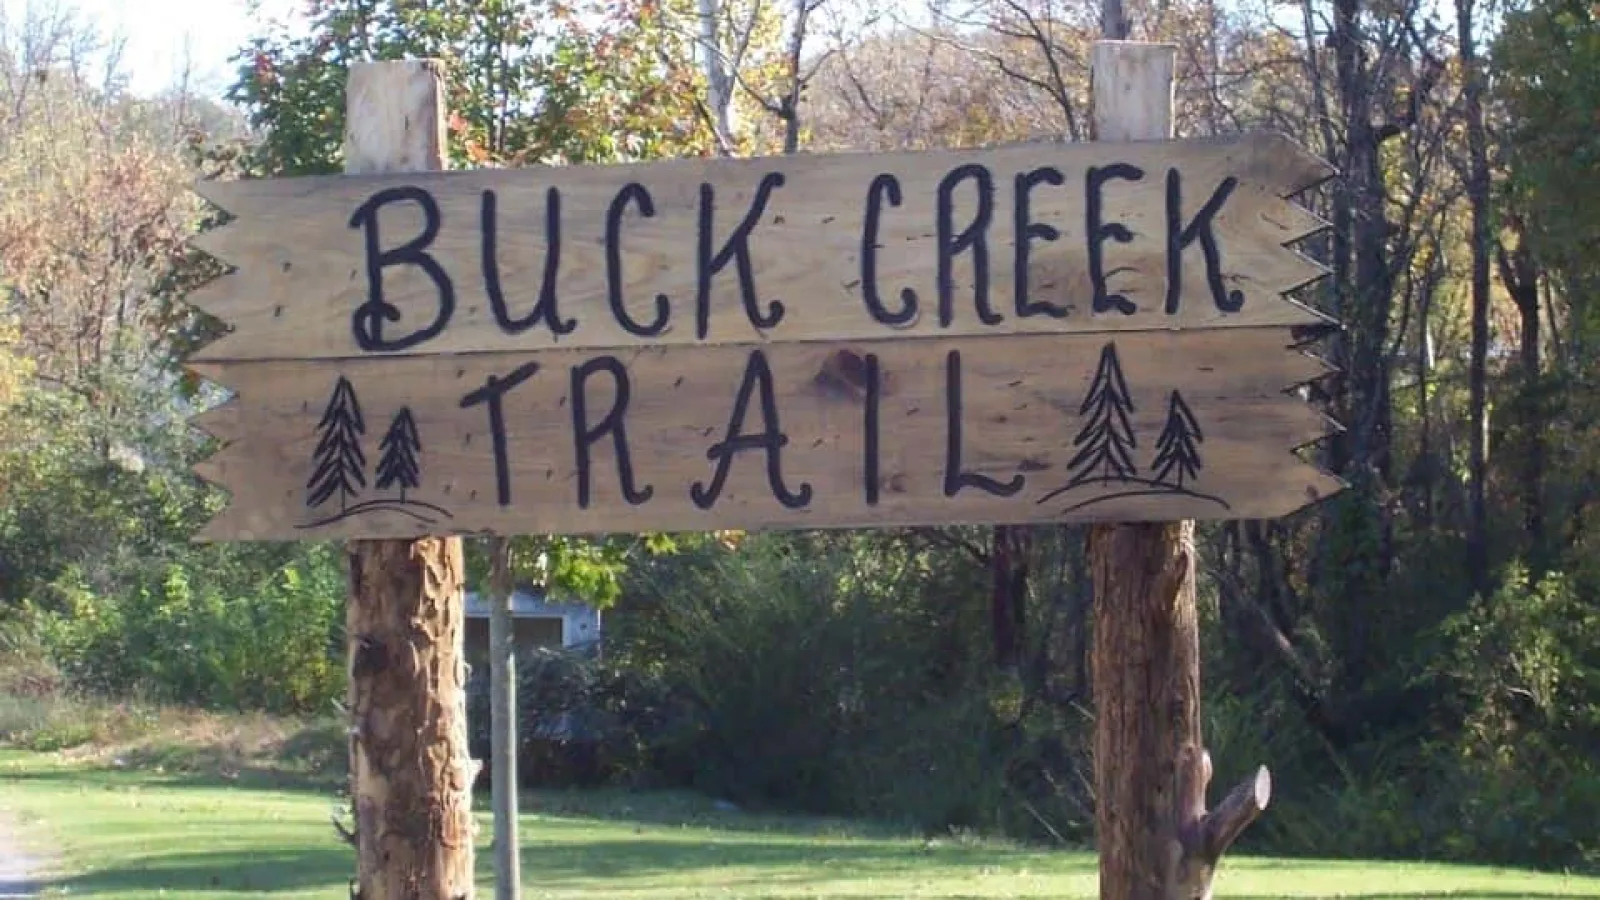 Sign for Buck Creek Trail